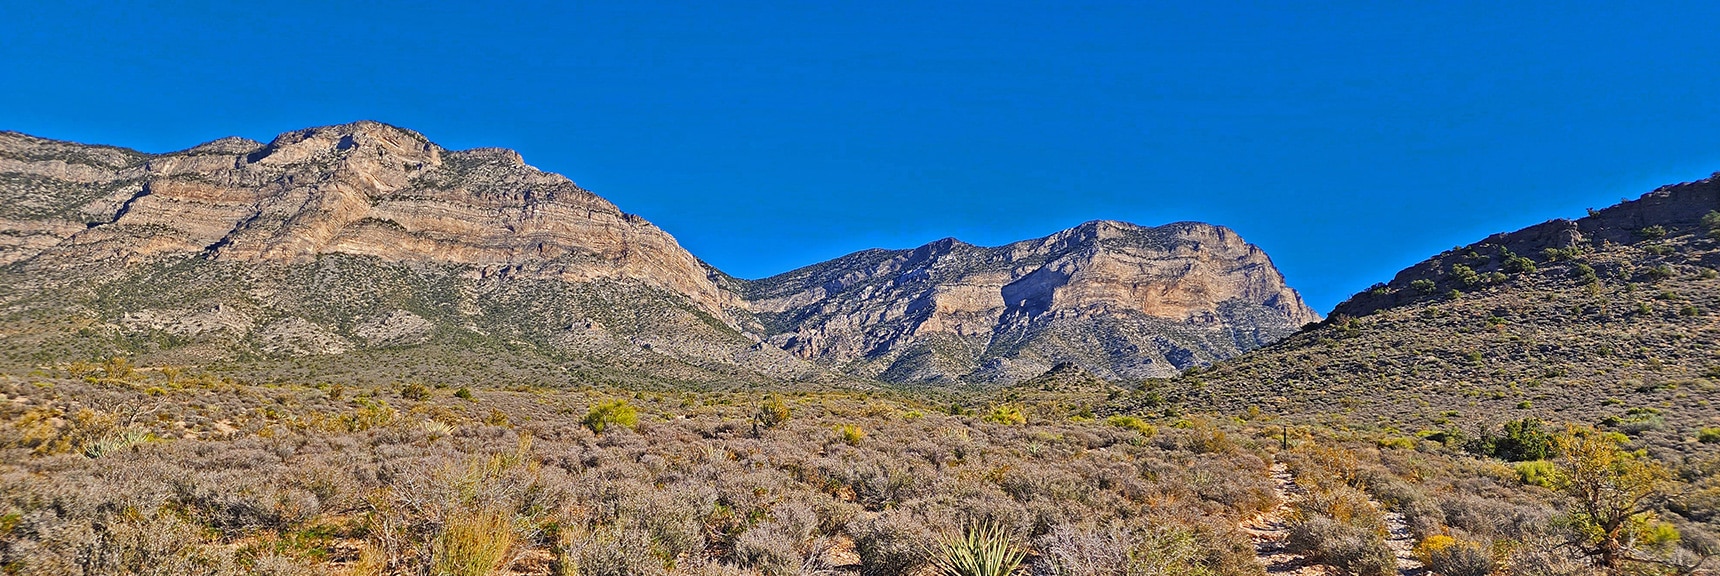 Heading Up the Keystone Thrust Trail. The Saddle Constantly Visible. | Kyle Canyon Grand Crossing | Southern Half | Red Rock Canyon National Conservation Area, Nevada